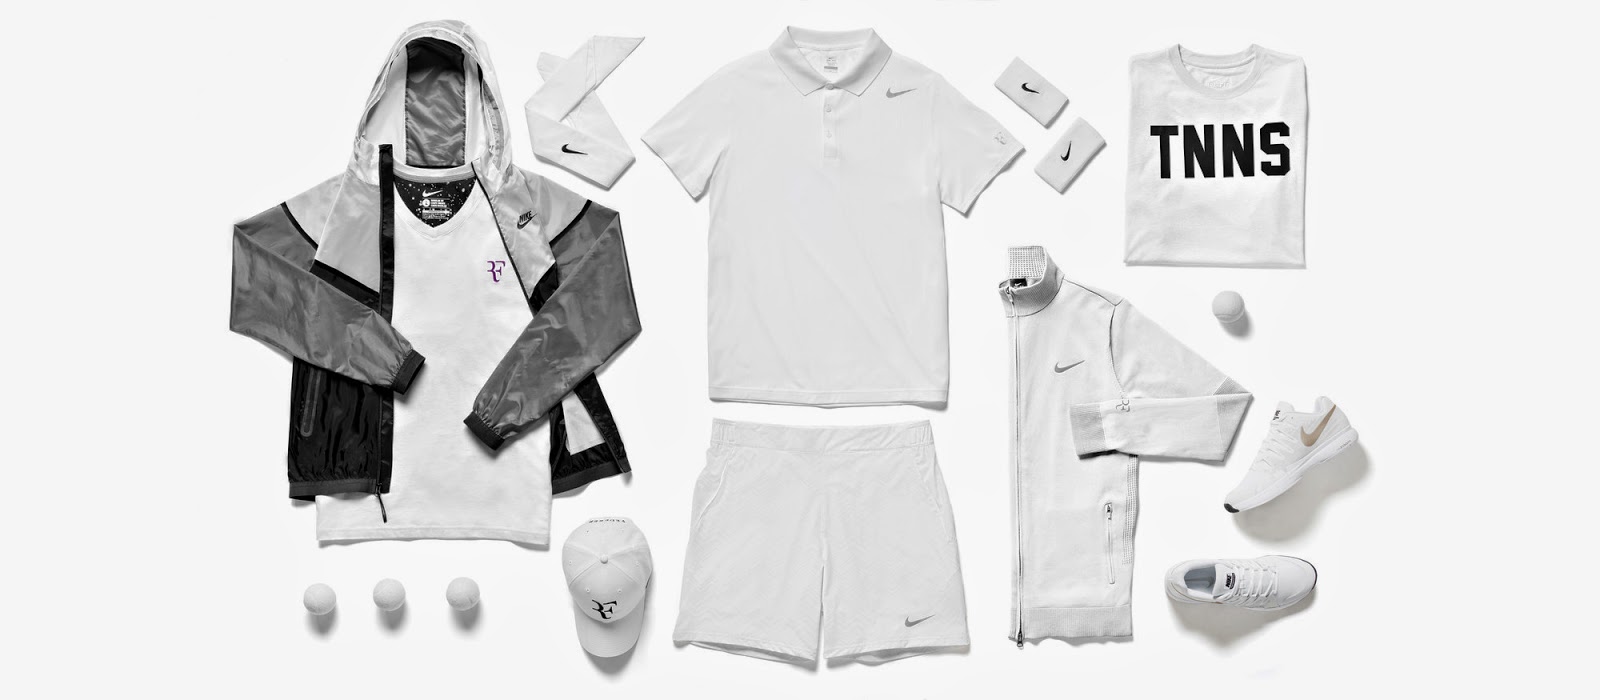 Down the Line Tennis Blog | Tennis News and Style